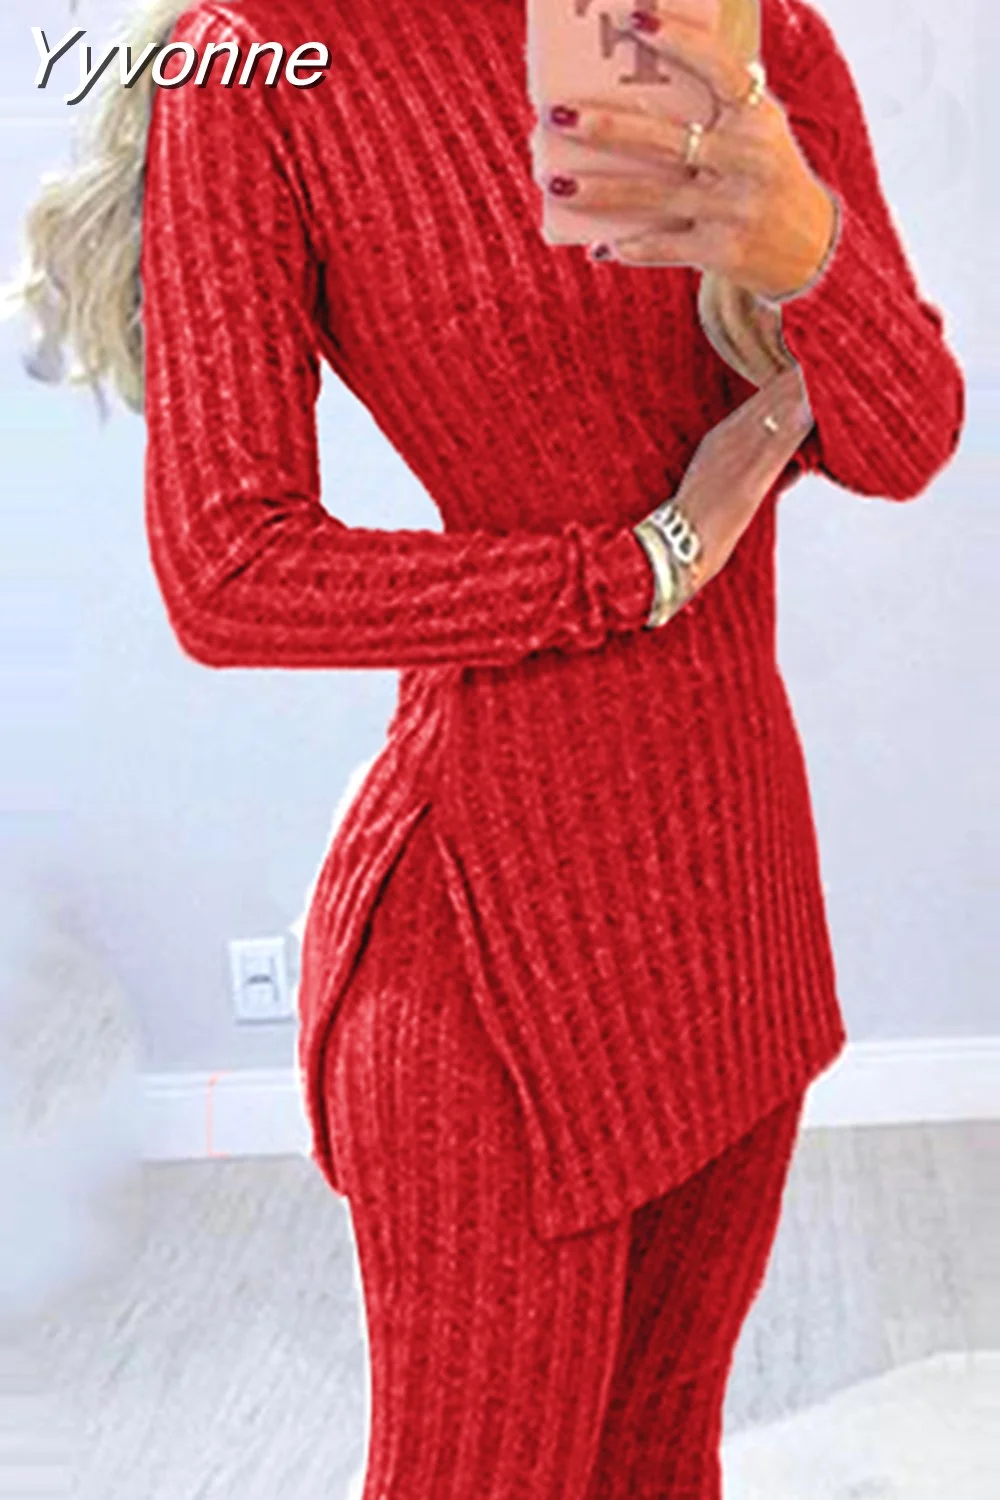 Yyvonne Women Winter 2pcs Suit Long Sleeve Ribbed Slit Long Top and High Waist Knitted Pencil Pants Set